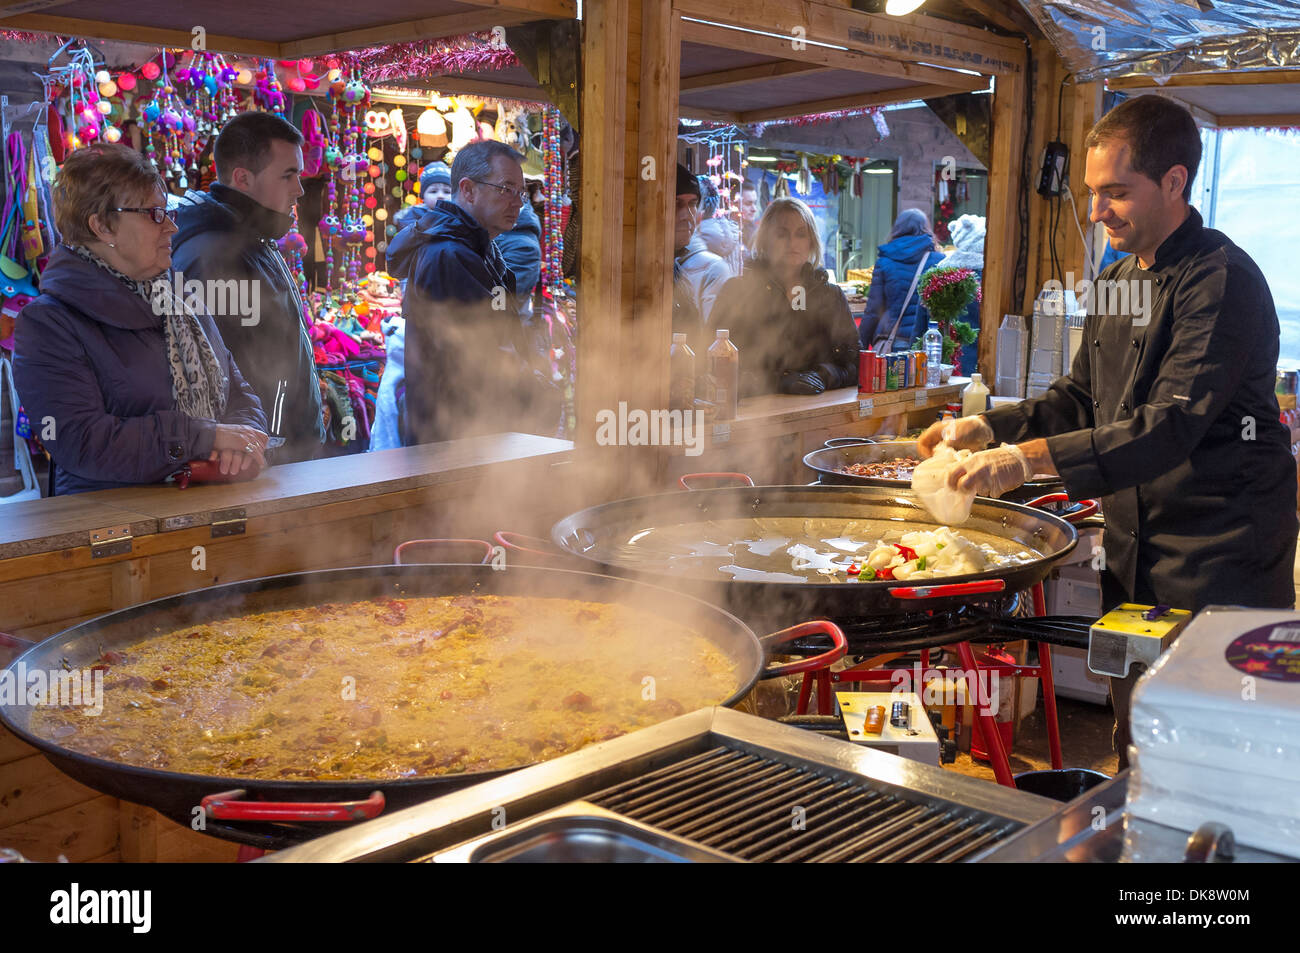 Fast food stall selling Spanish food and bulk paella during the Christmas festival market, Glasgow, Scotland, UK, Great Britain Stock Photo